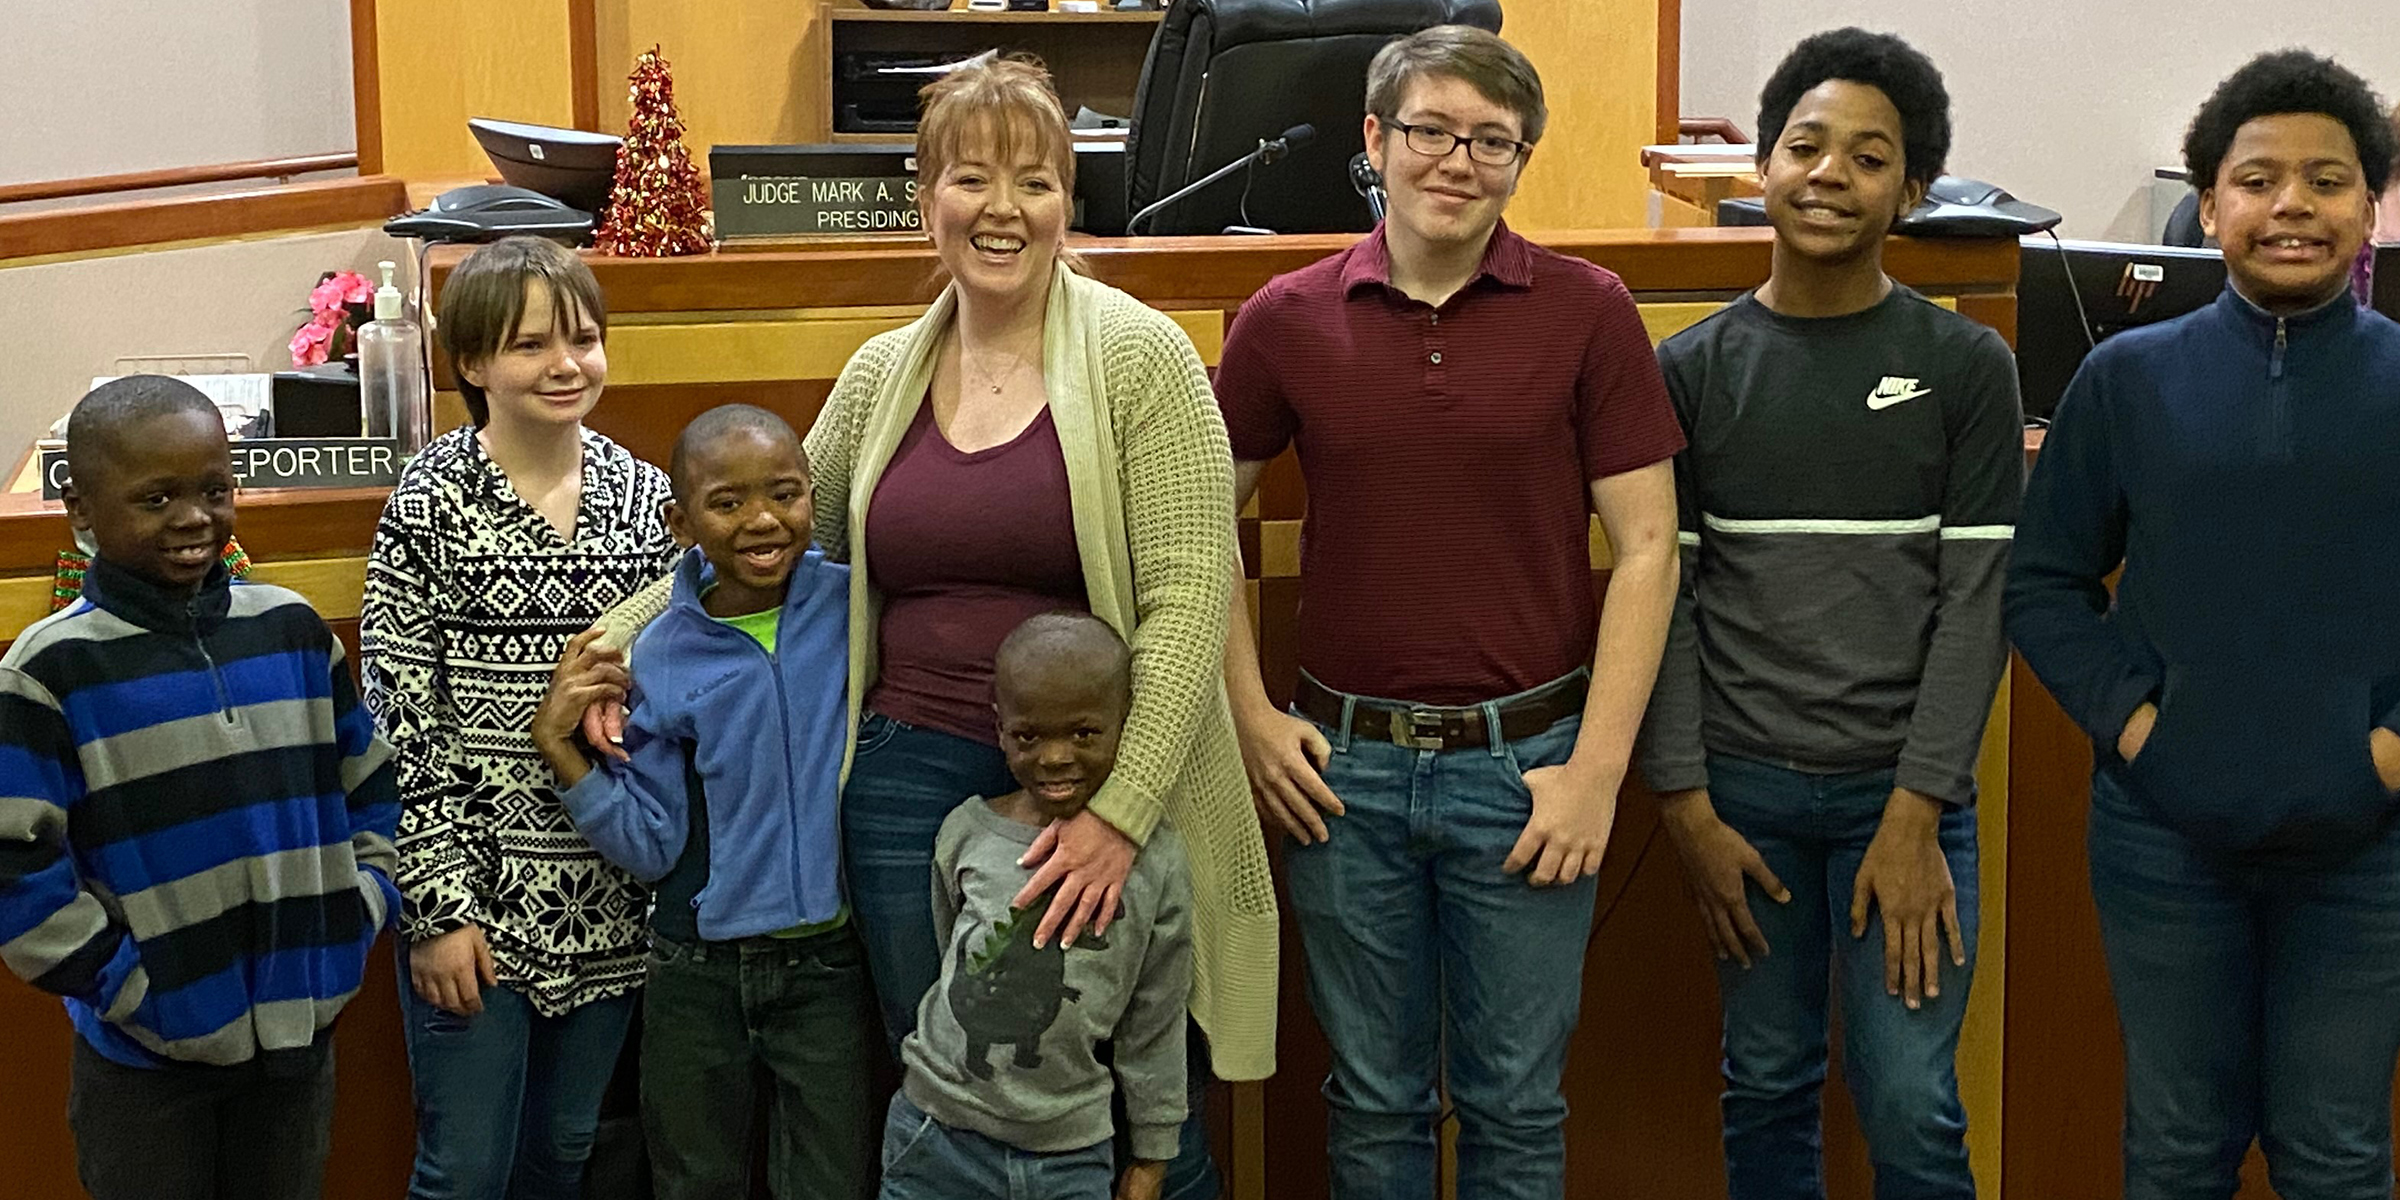 Single Mother Of 2 Who Grew Up In Foster Care Adopts 6 Boys At Once To Keep Siblings Together